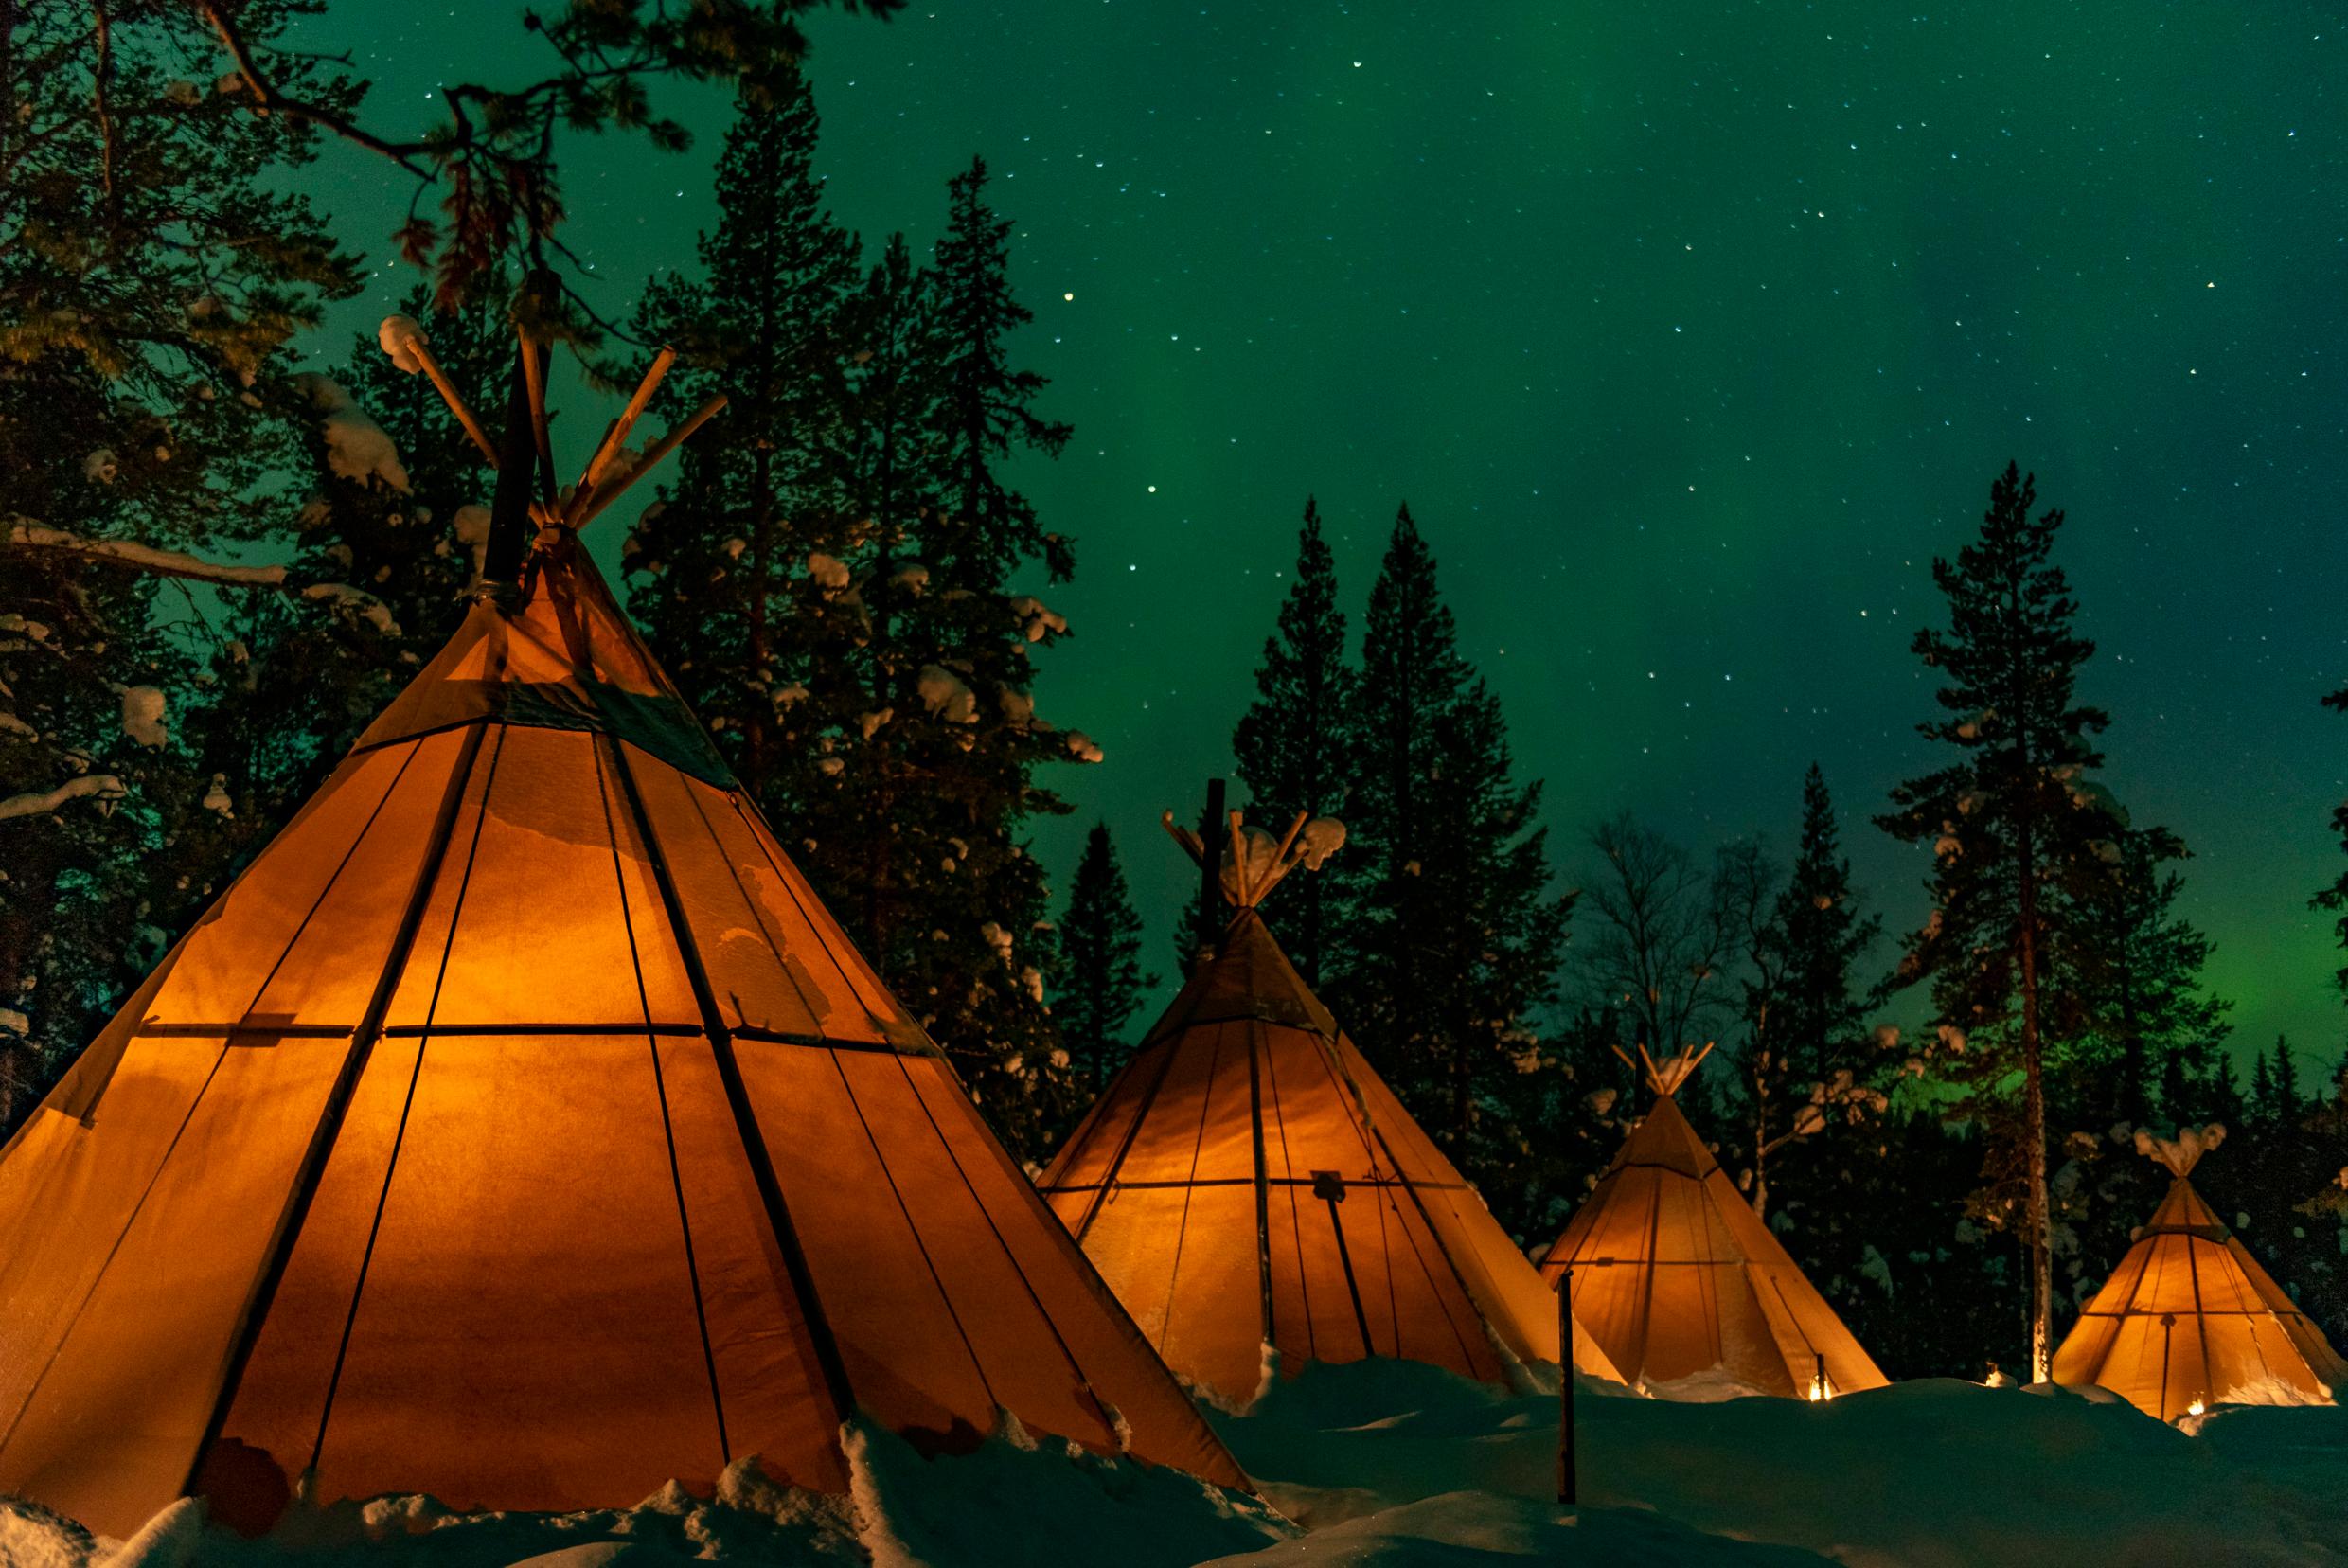 Lavvu tents at a nature camp in Lapland. It’s a starry night in a snowy landscape and the light glows in the tents.